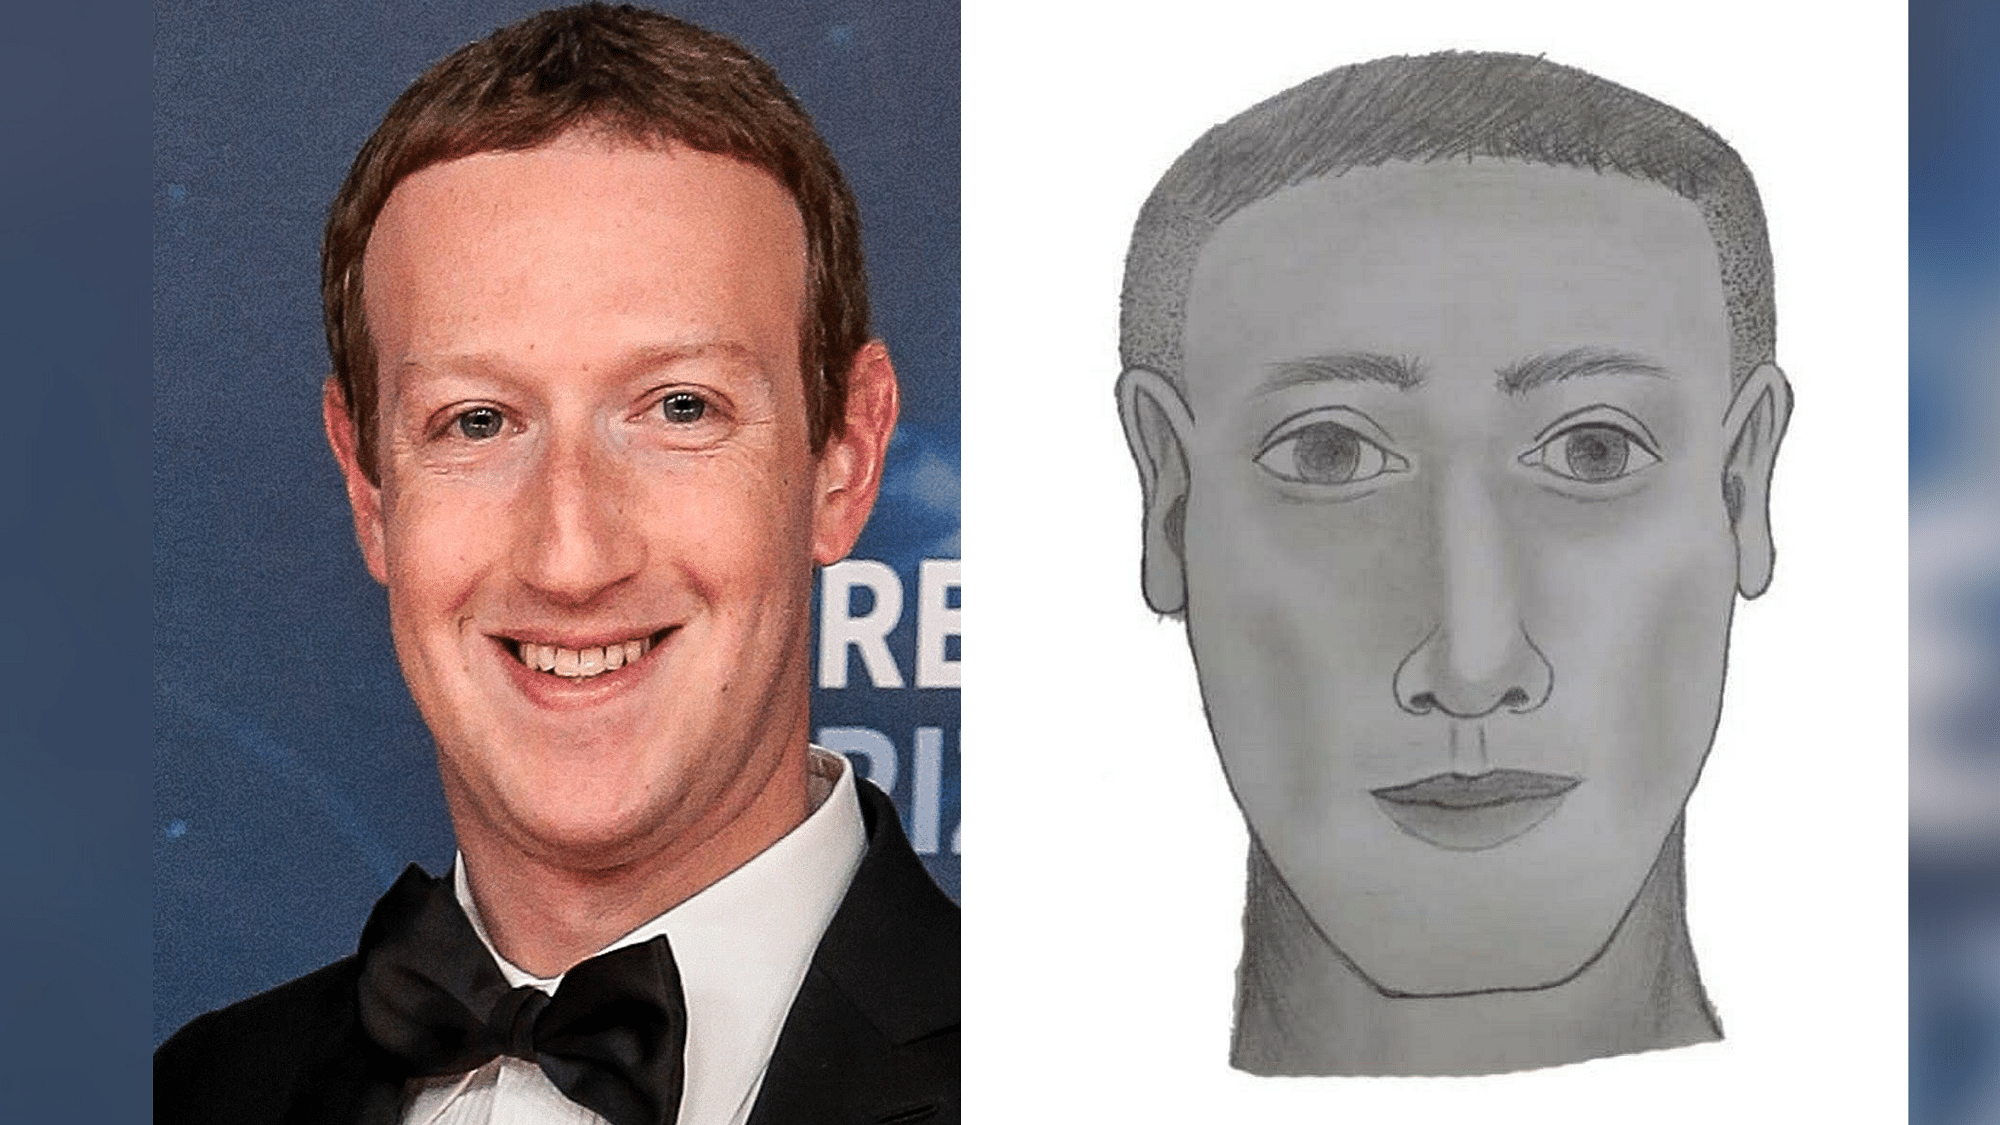 CHIANG RAI THAILAND  APRIL 25  Hand Drawn Portrait of the Smiling  Facebook CEO Mark Zuckerberg on April 25 2017 in Editorial Stock Image   Illustration of background drawing 99551119